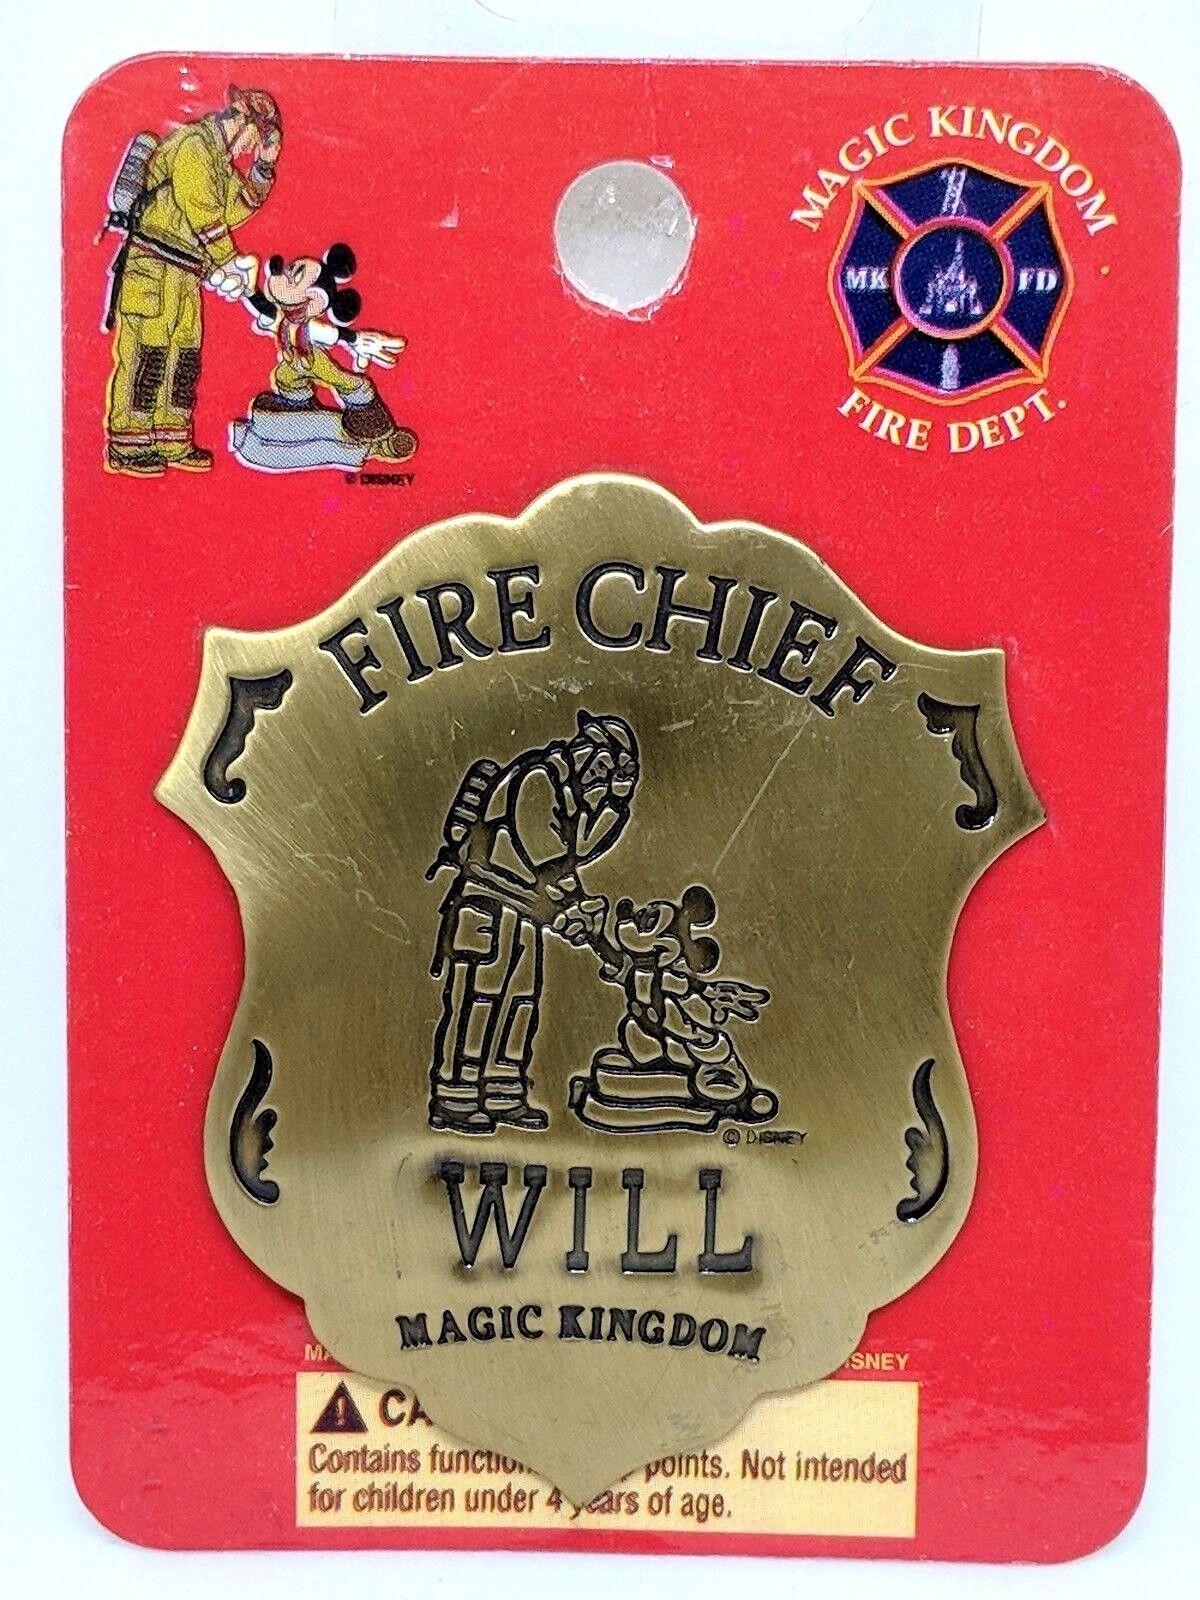 Disney Magic Kingdom Fireman & Mickey Mouse Fire Chief Badge /Pin For WILL